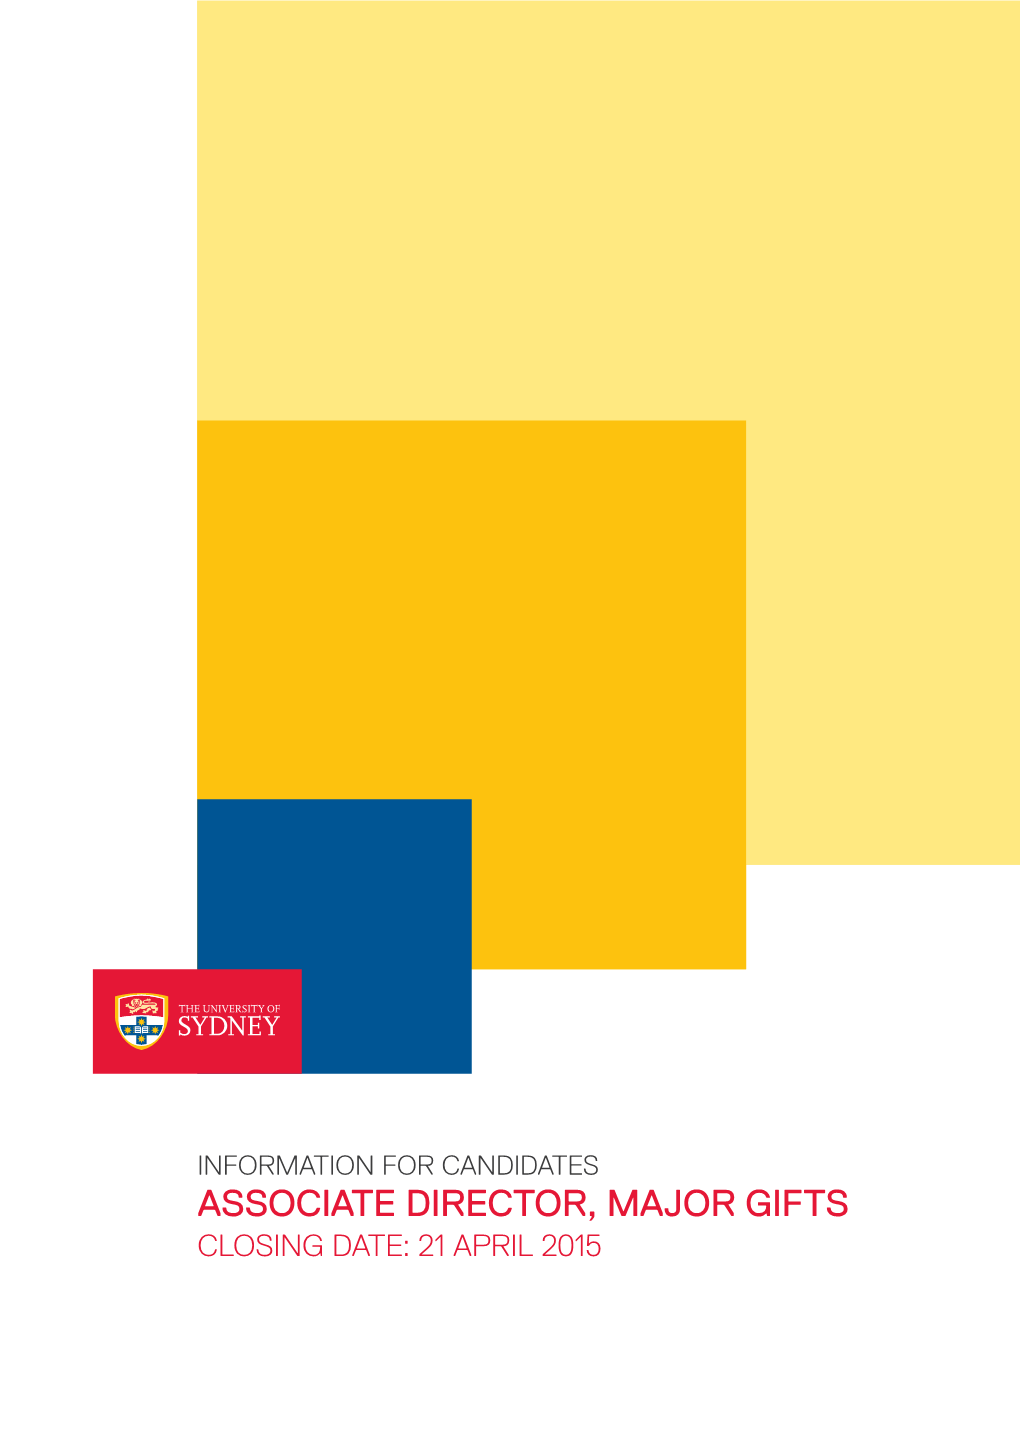 Information for Candidates Associate Director, Major Gifts Closing Date: 21 April 2015 Contents